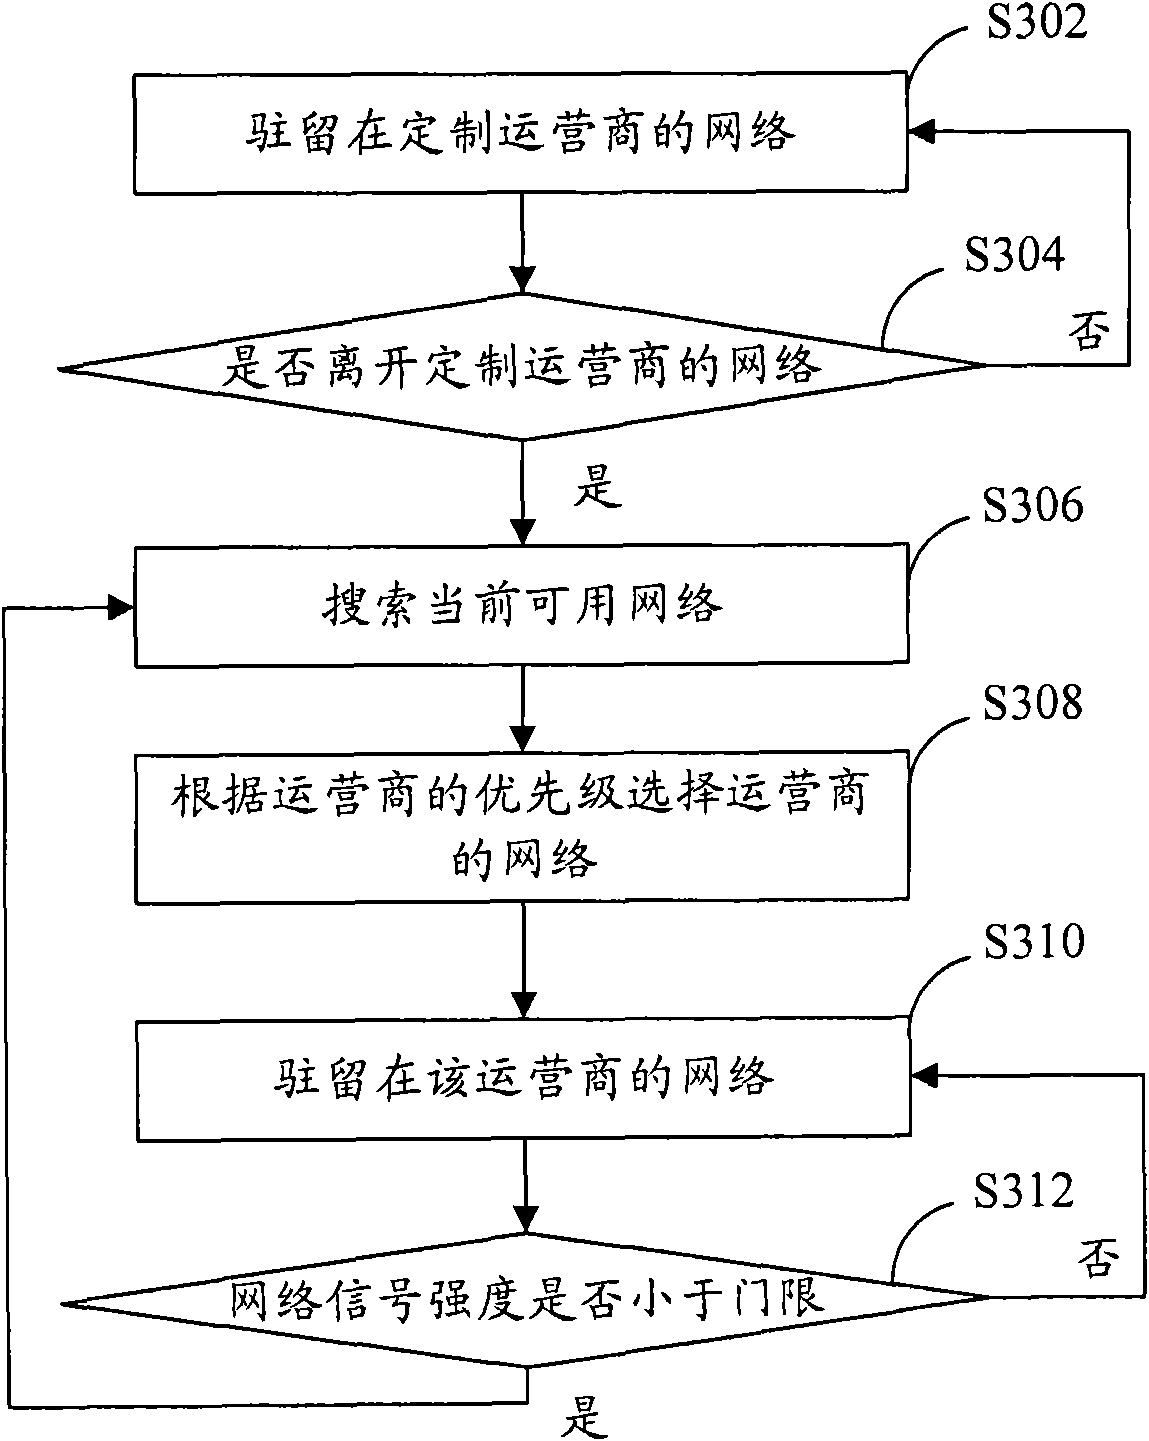 Method for automatically selecting network and terminal